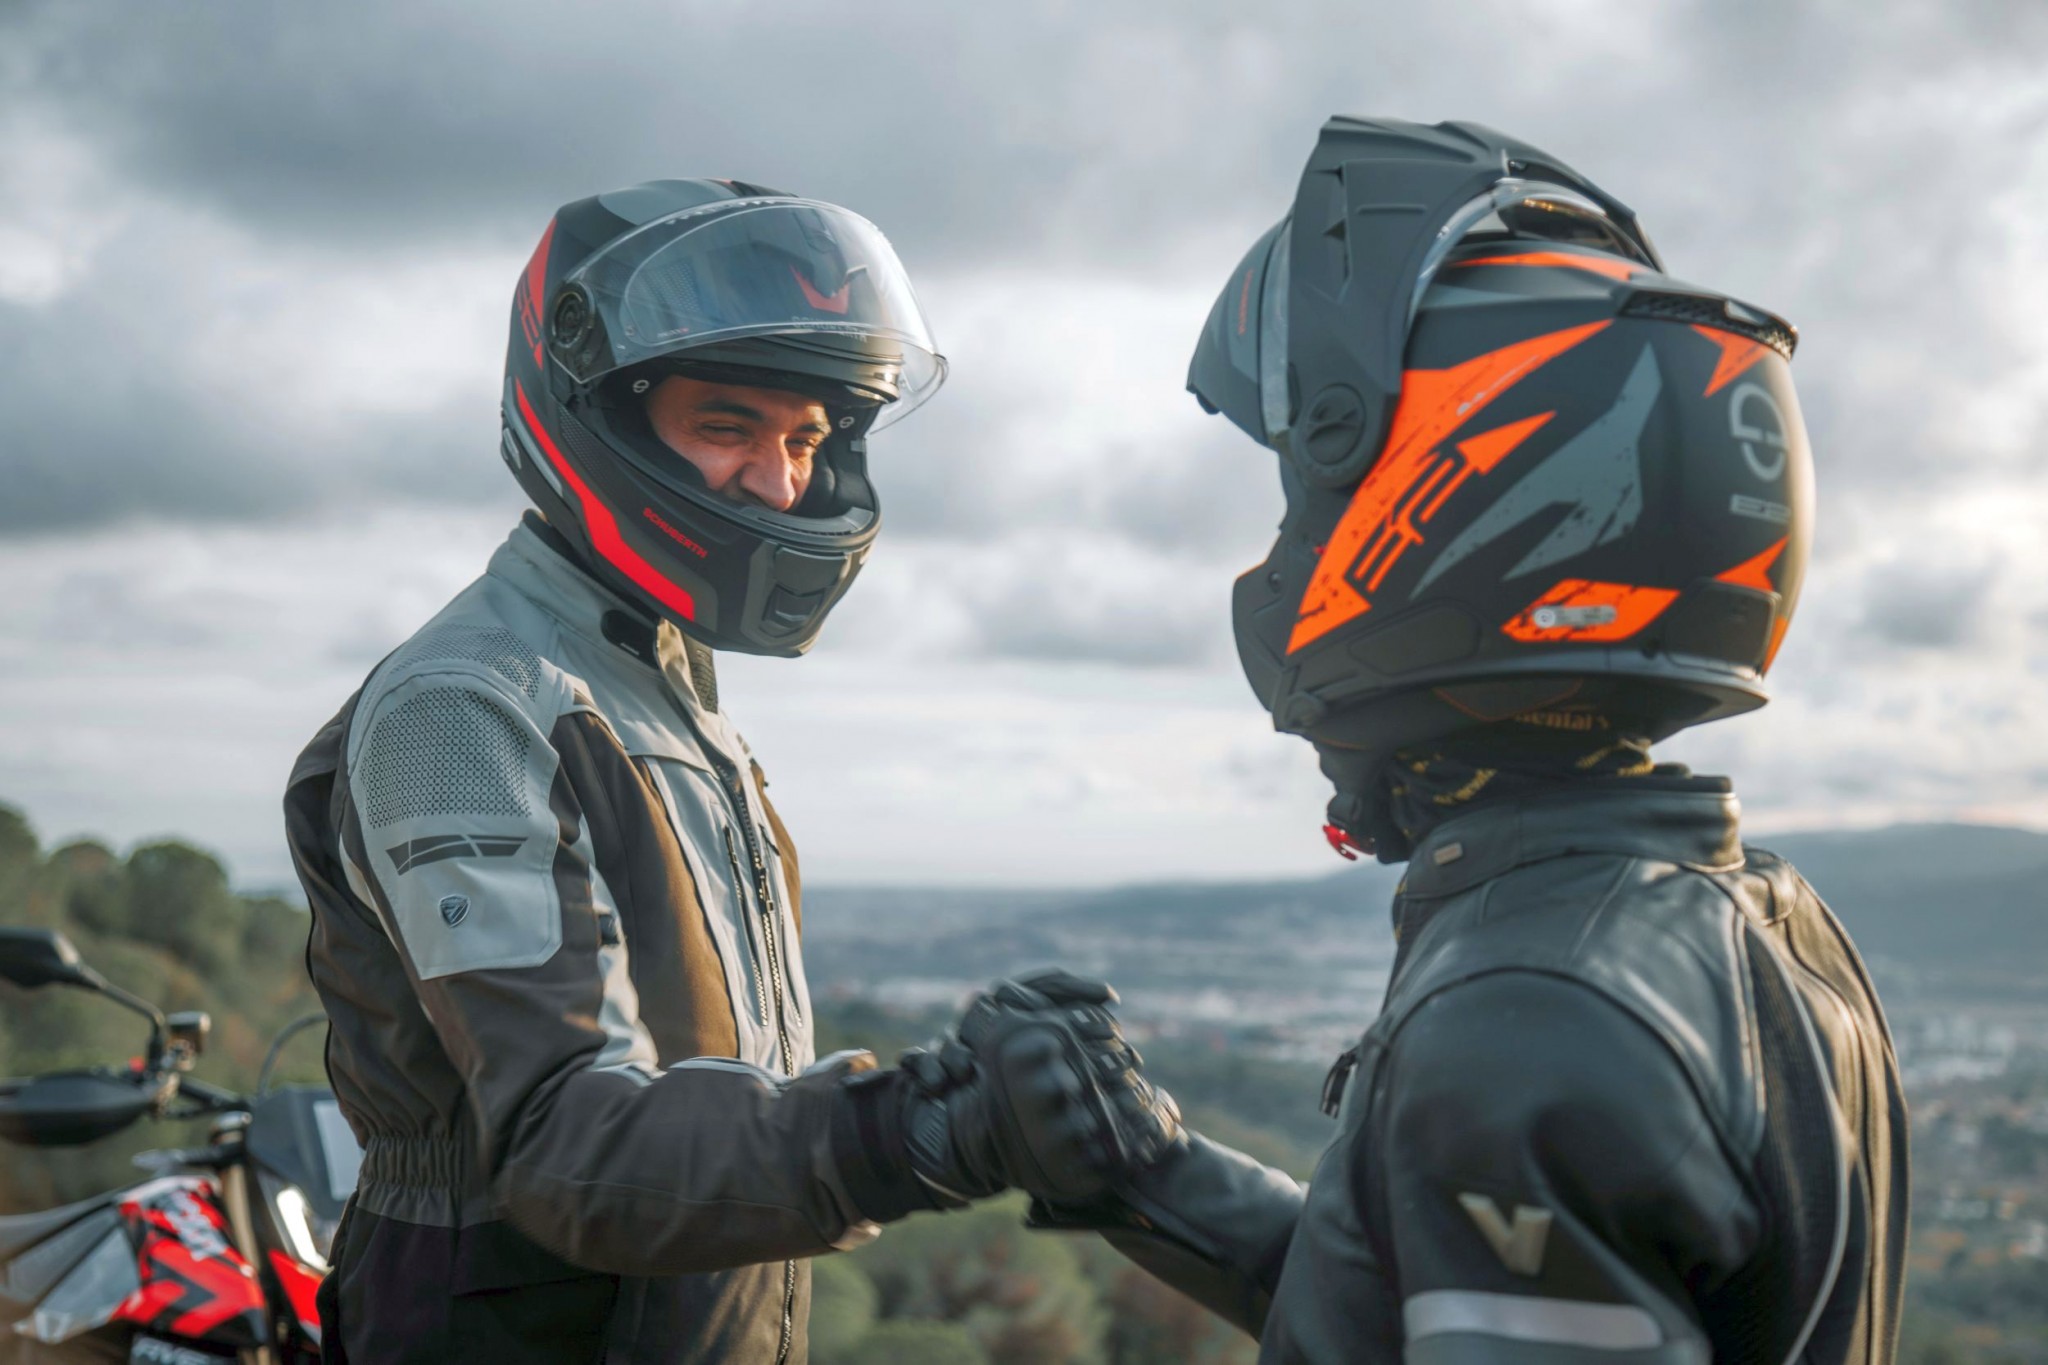 Schuberth S3 sport touring helmet in the test - Image 29